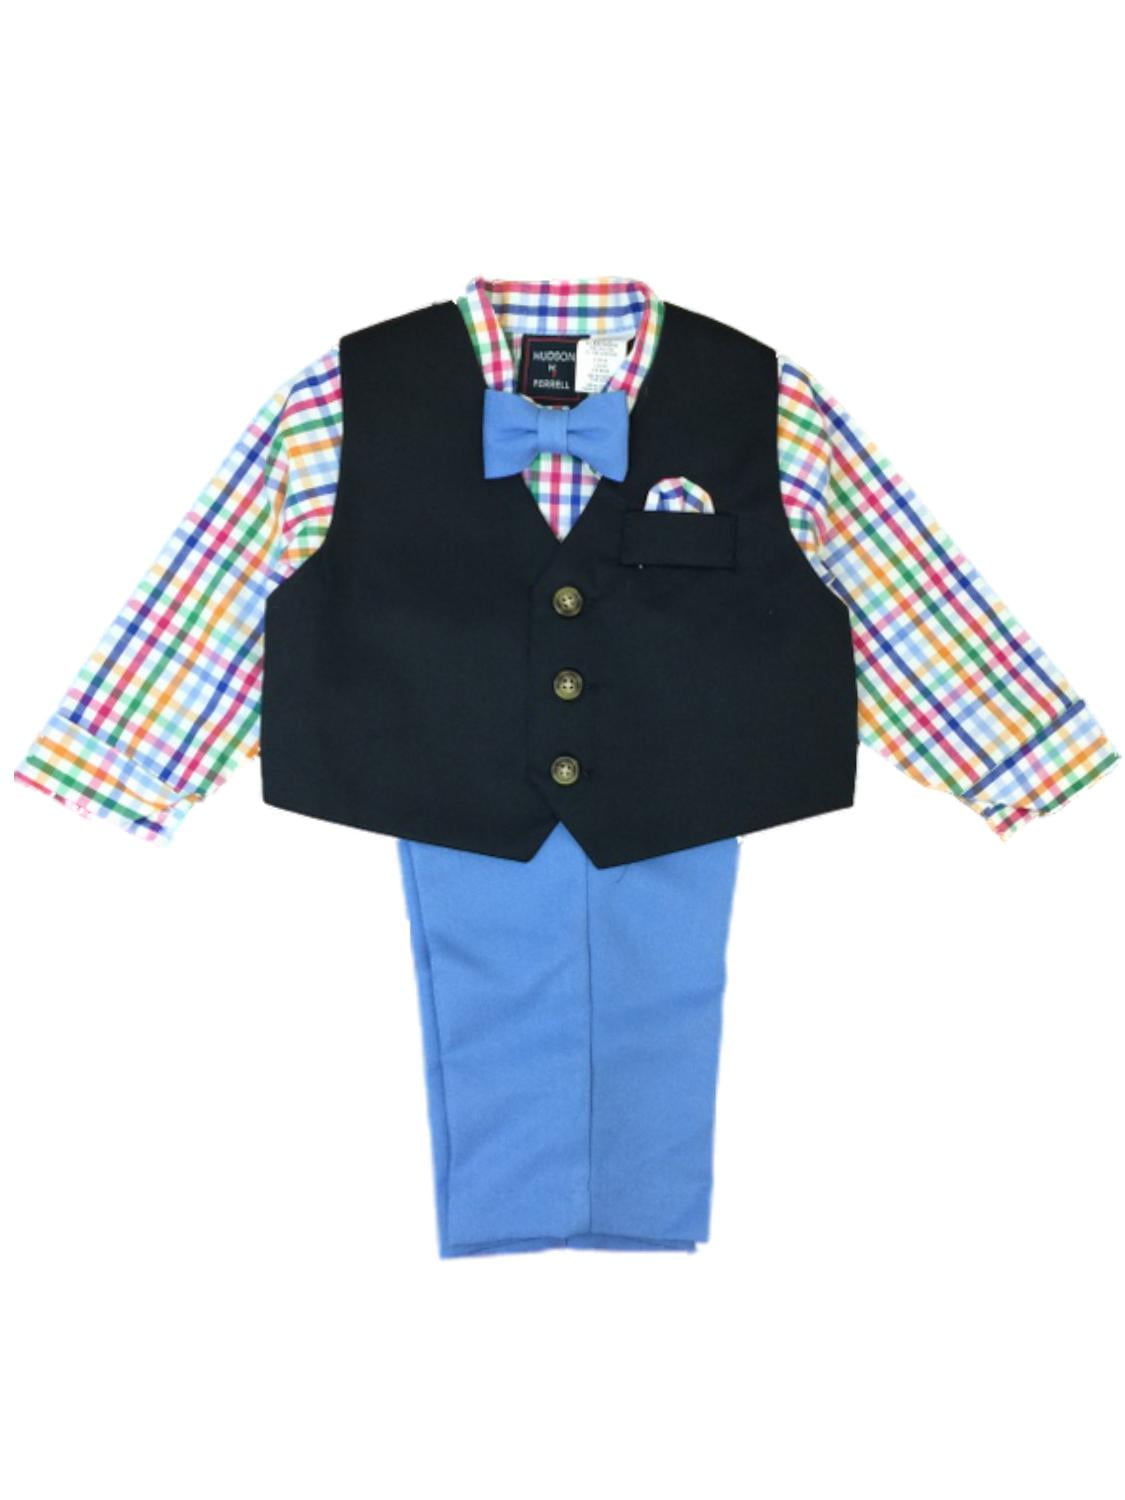 Infant Boys Starting Out 4pc Navy & Green Vest Suit Size 24 Months 